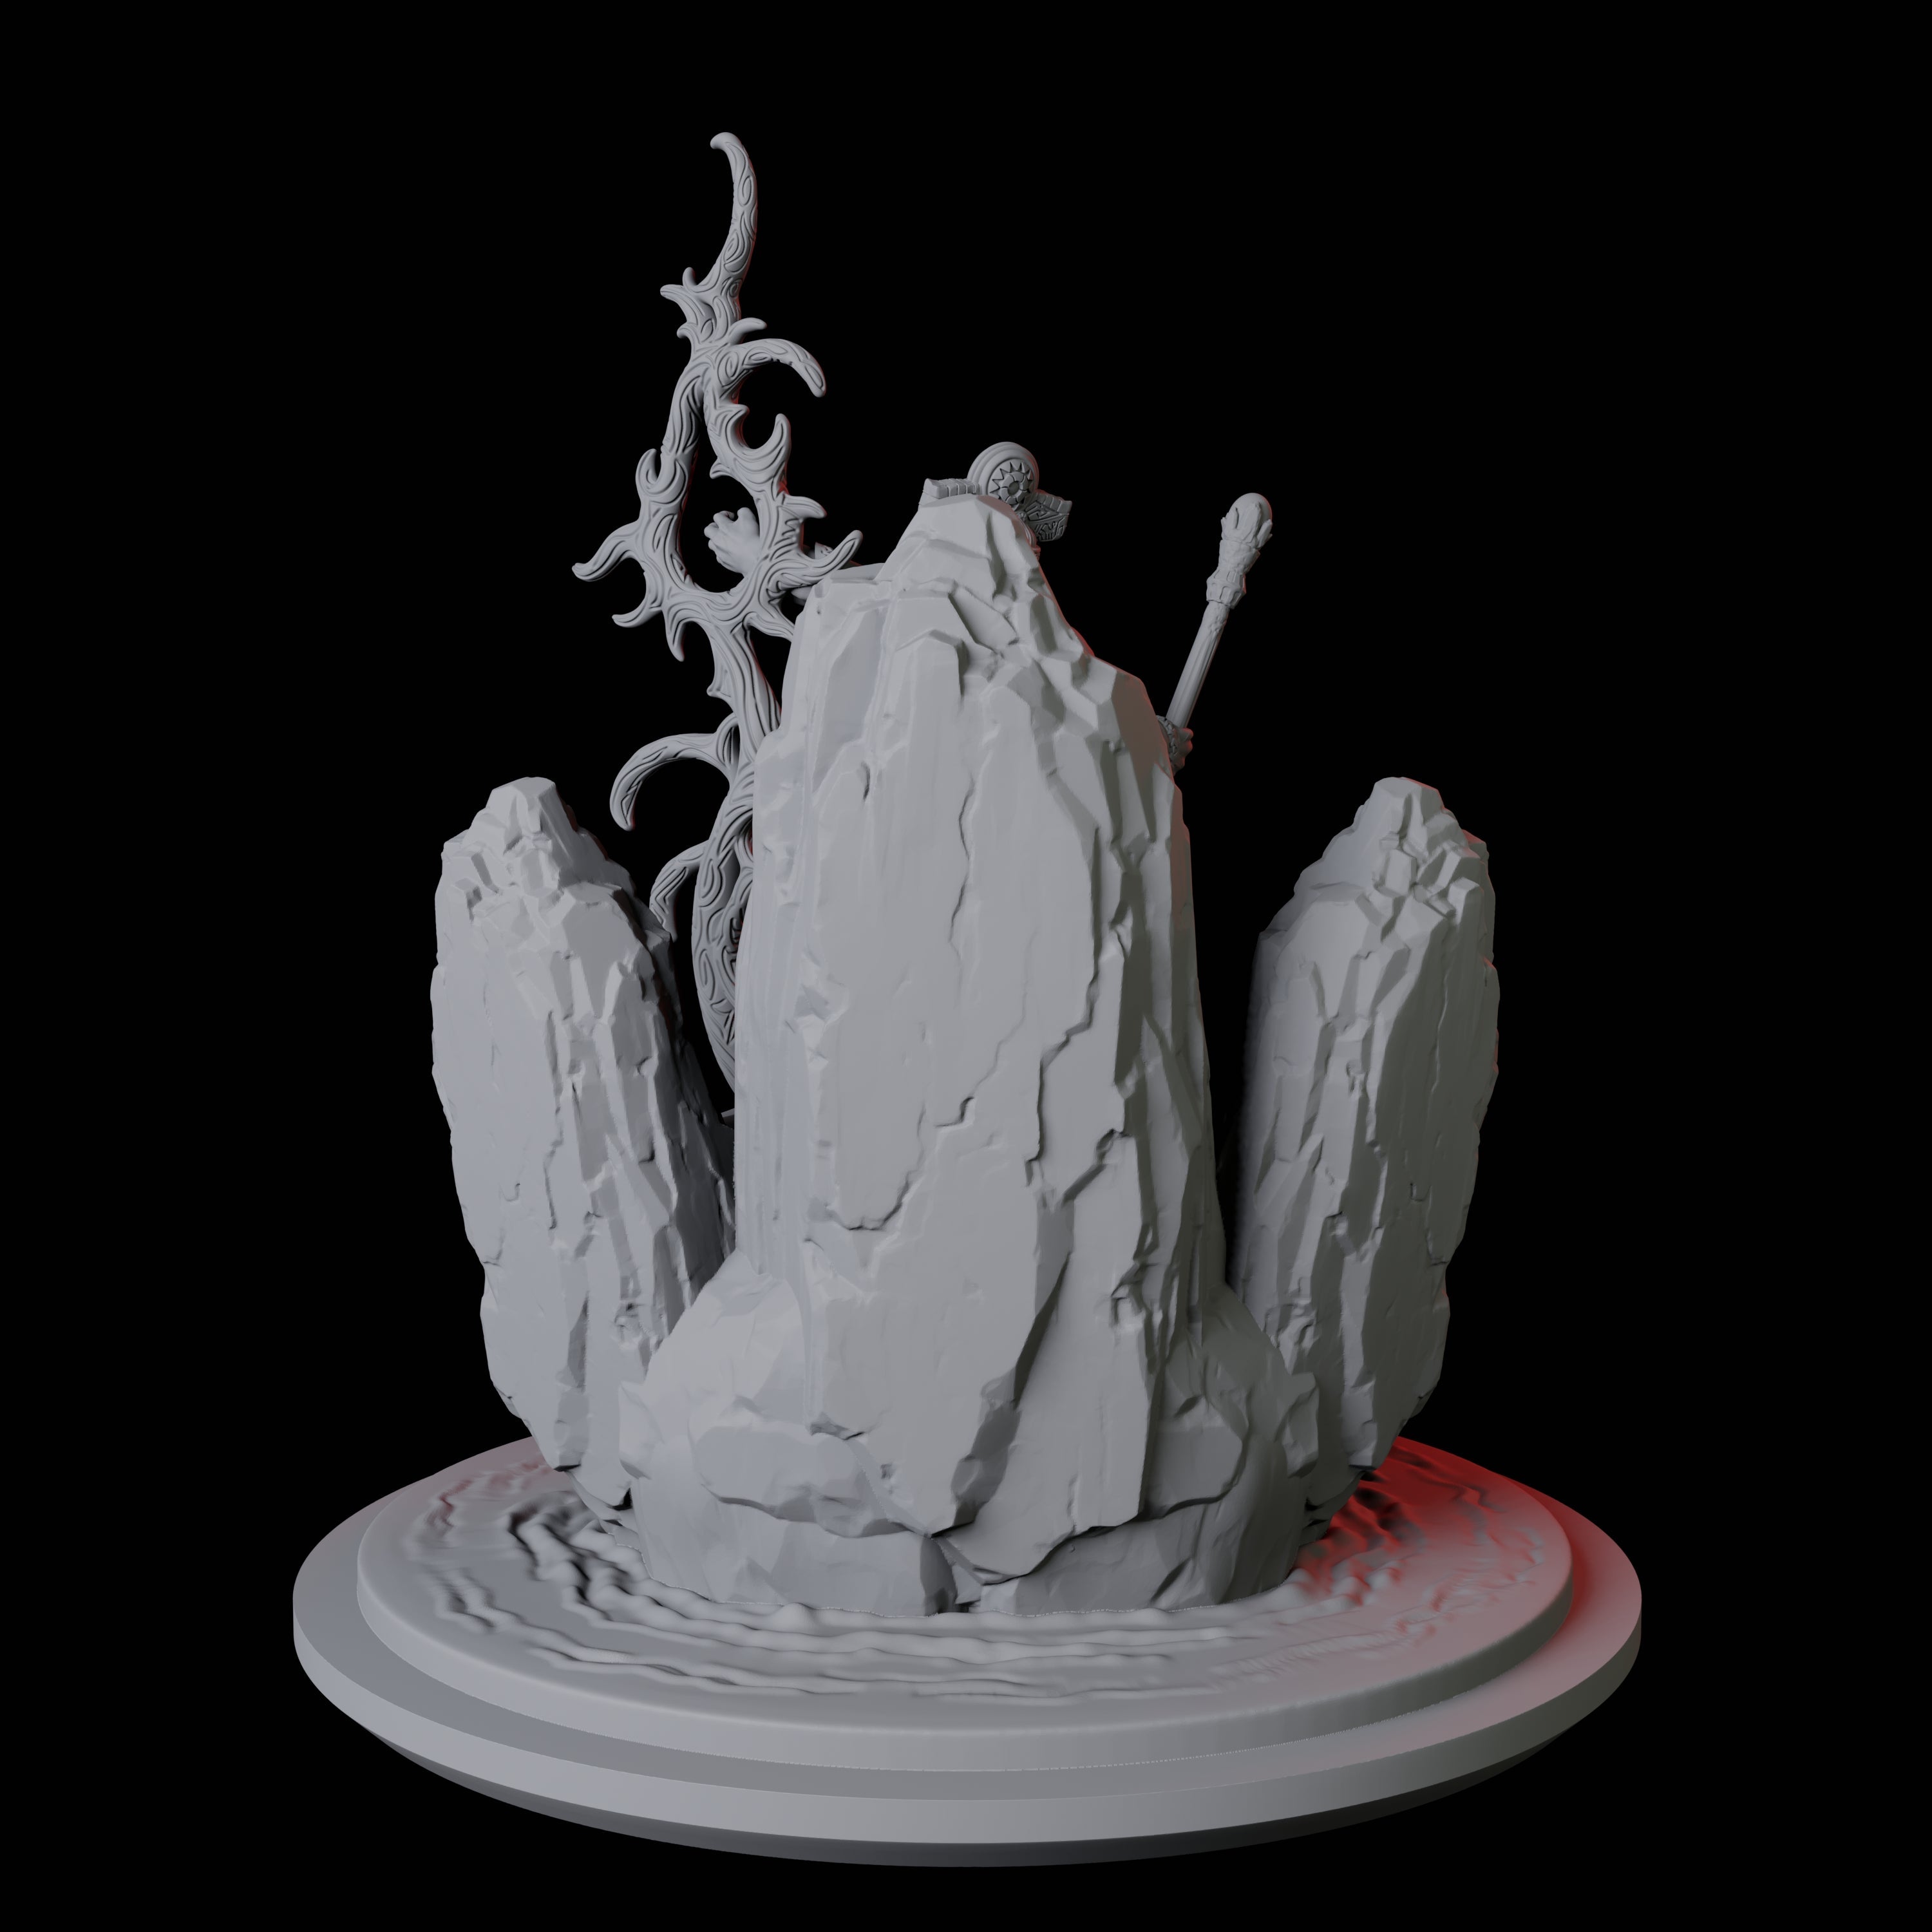 Elder Wizard Miniature for Dungeons and Dragons, Pathfinder or other TTRPGs